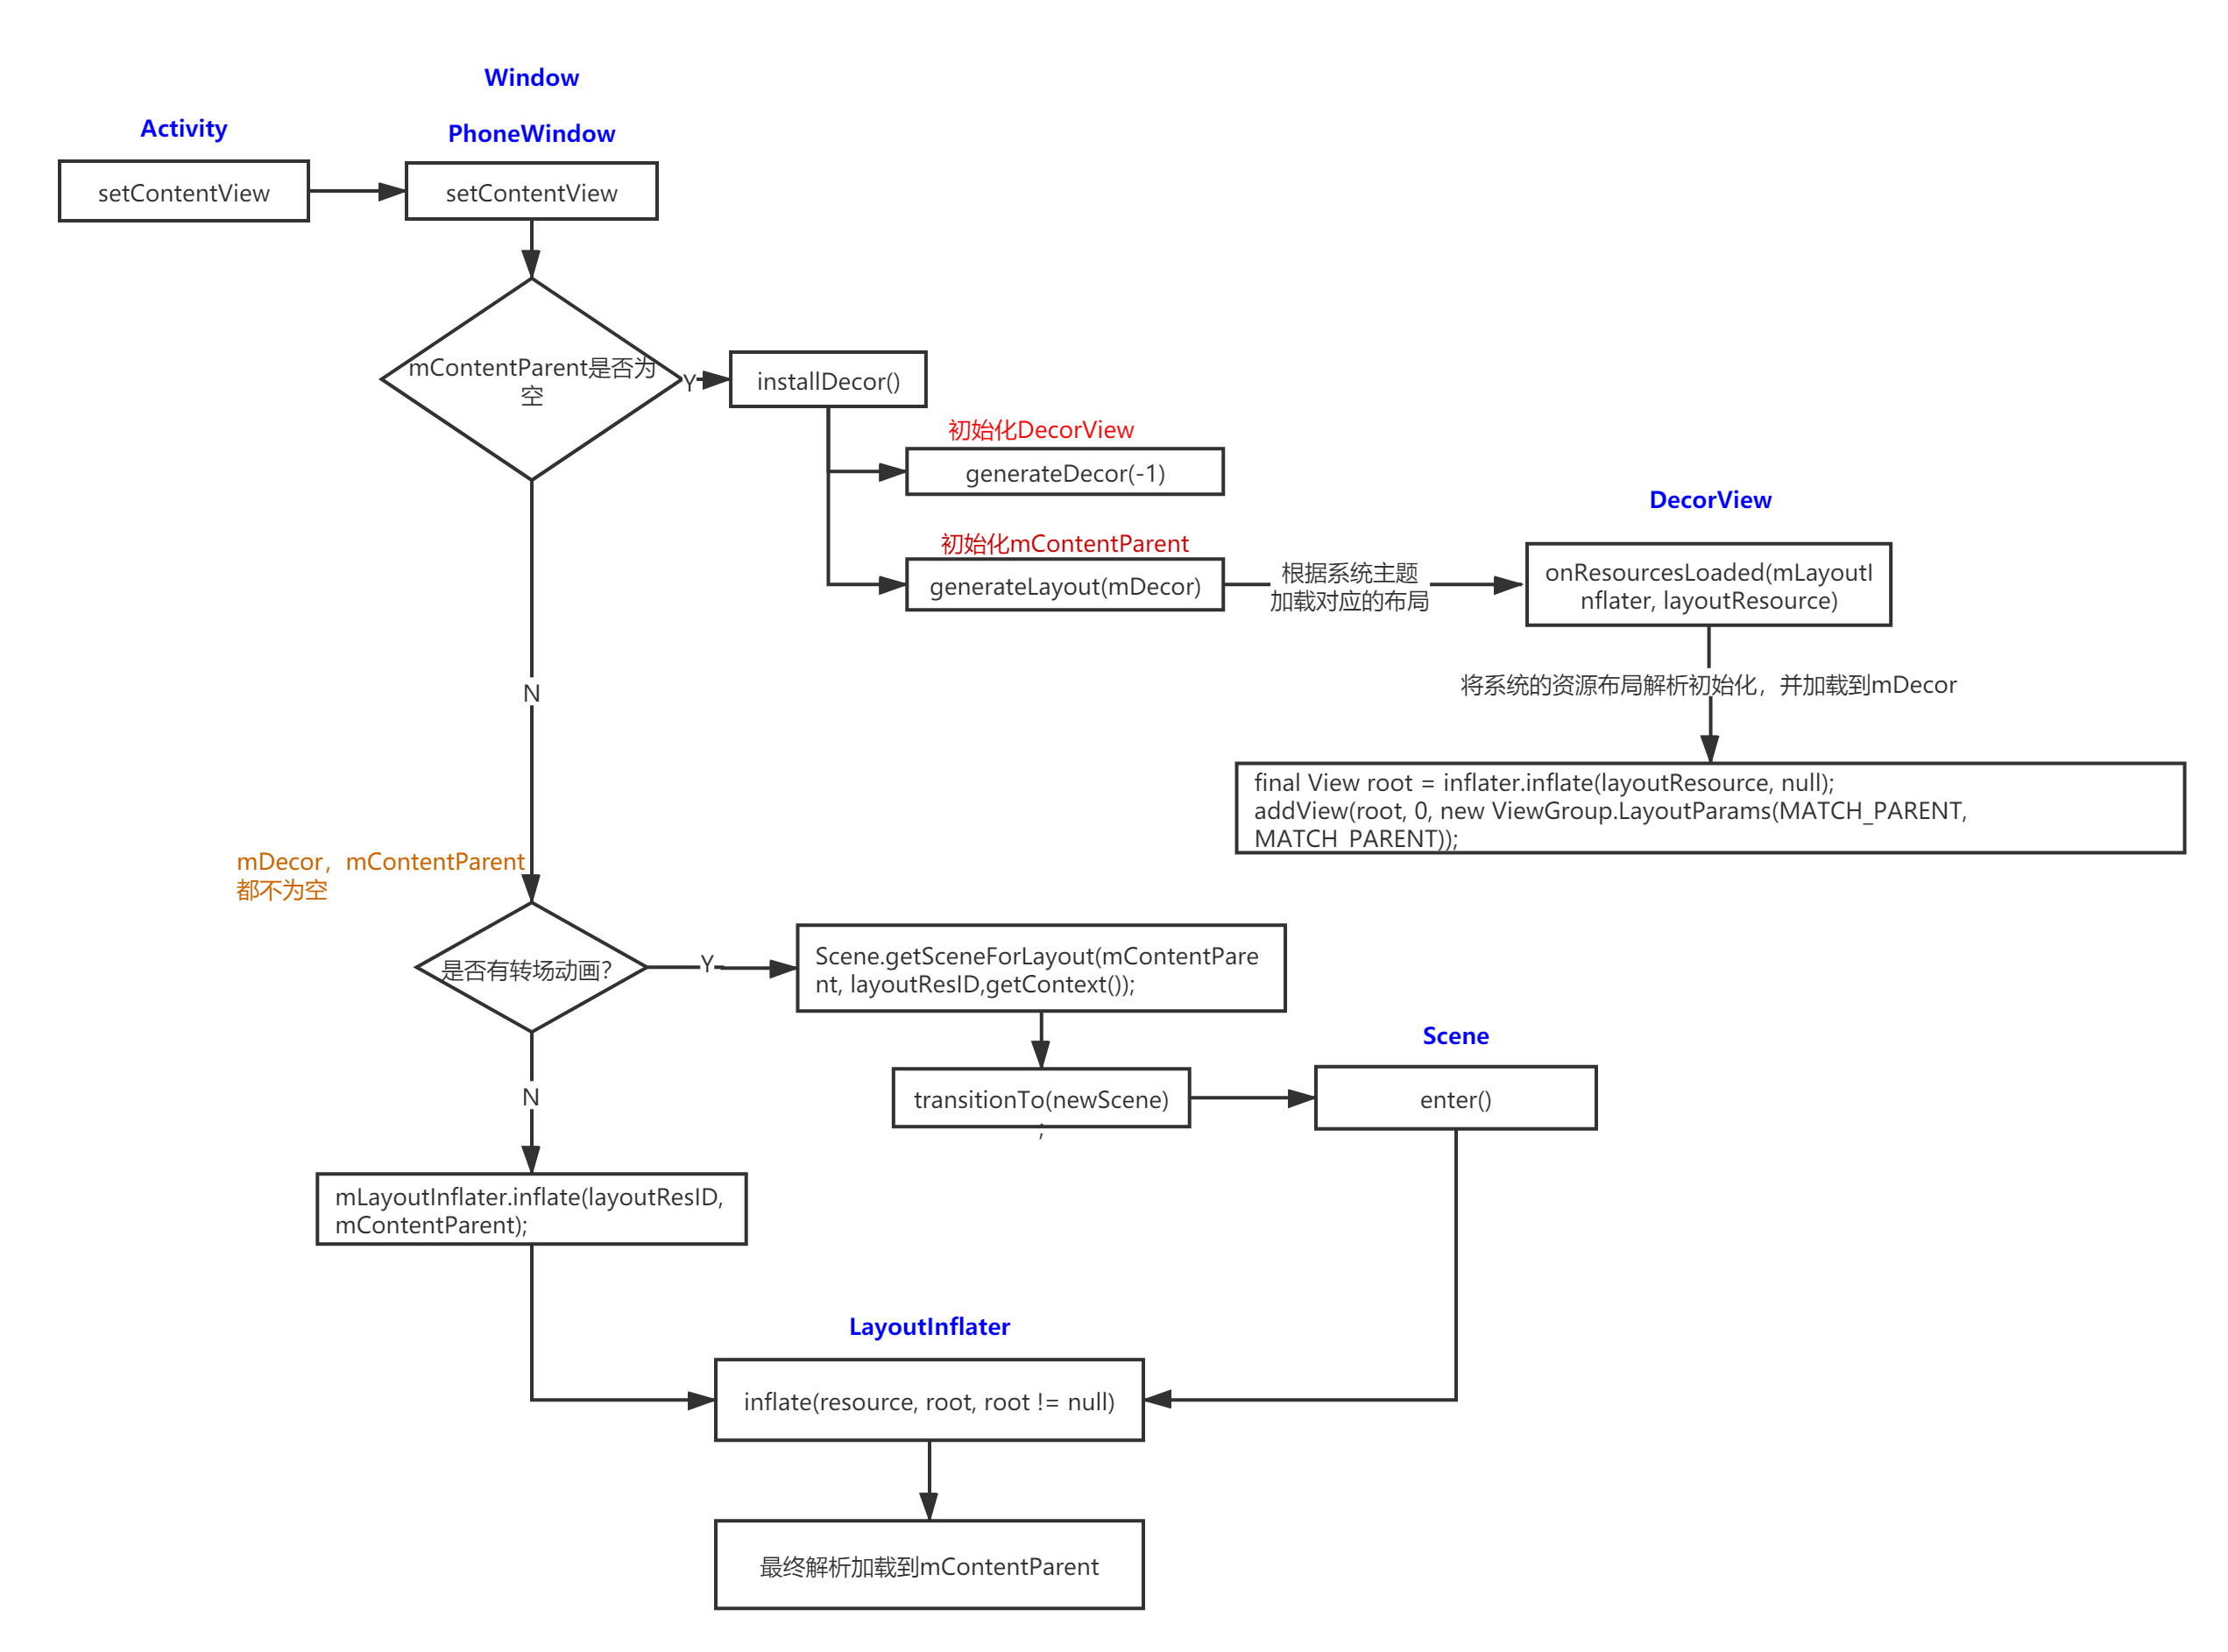 Activity is added to the flowchart of View